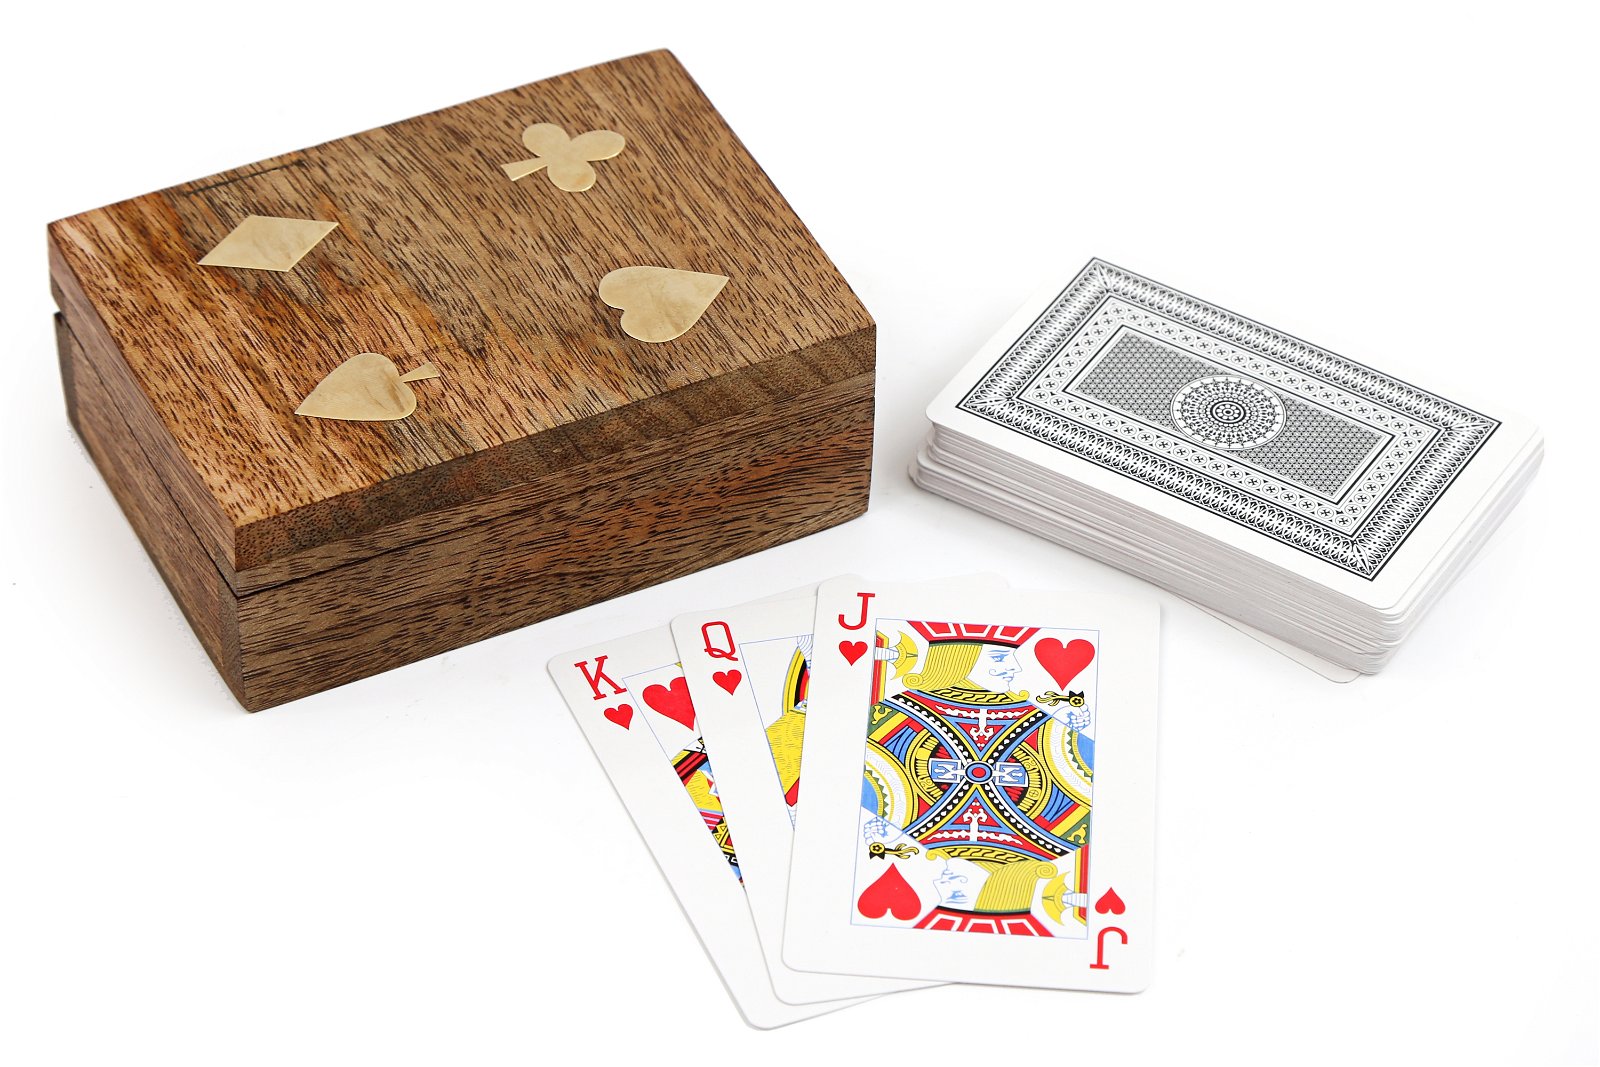 View Playing Cards In Wooden Box information